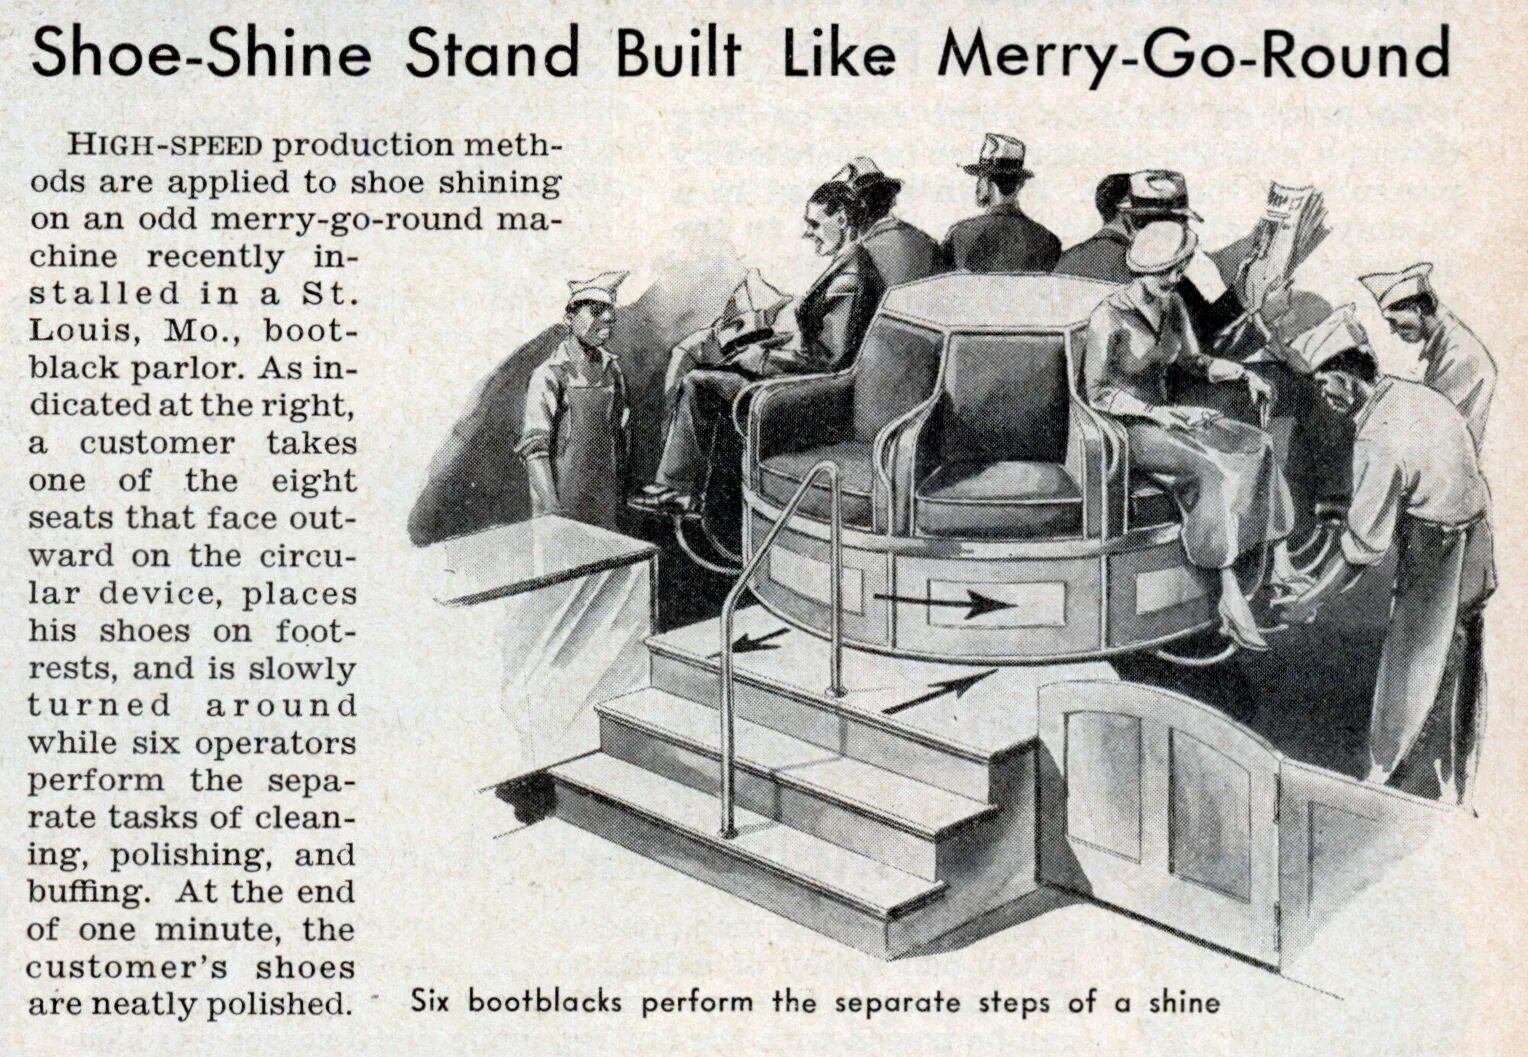 Confusing Shoe Placement. A Living Shoeshine Machine. Six silly sisters selling Shining Shoes. A Living Shoeshine Machine femdom.